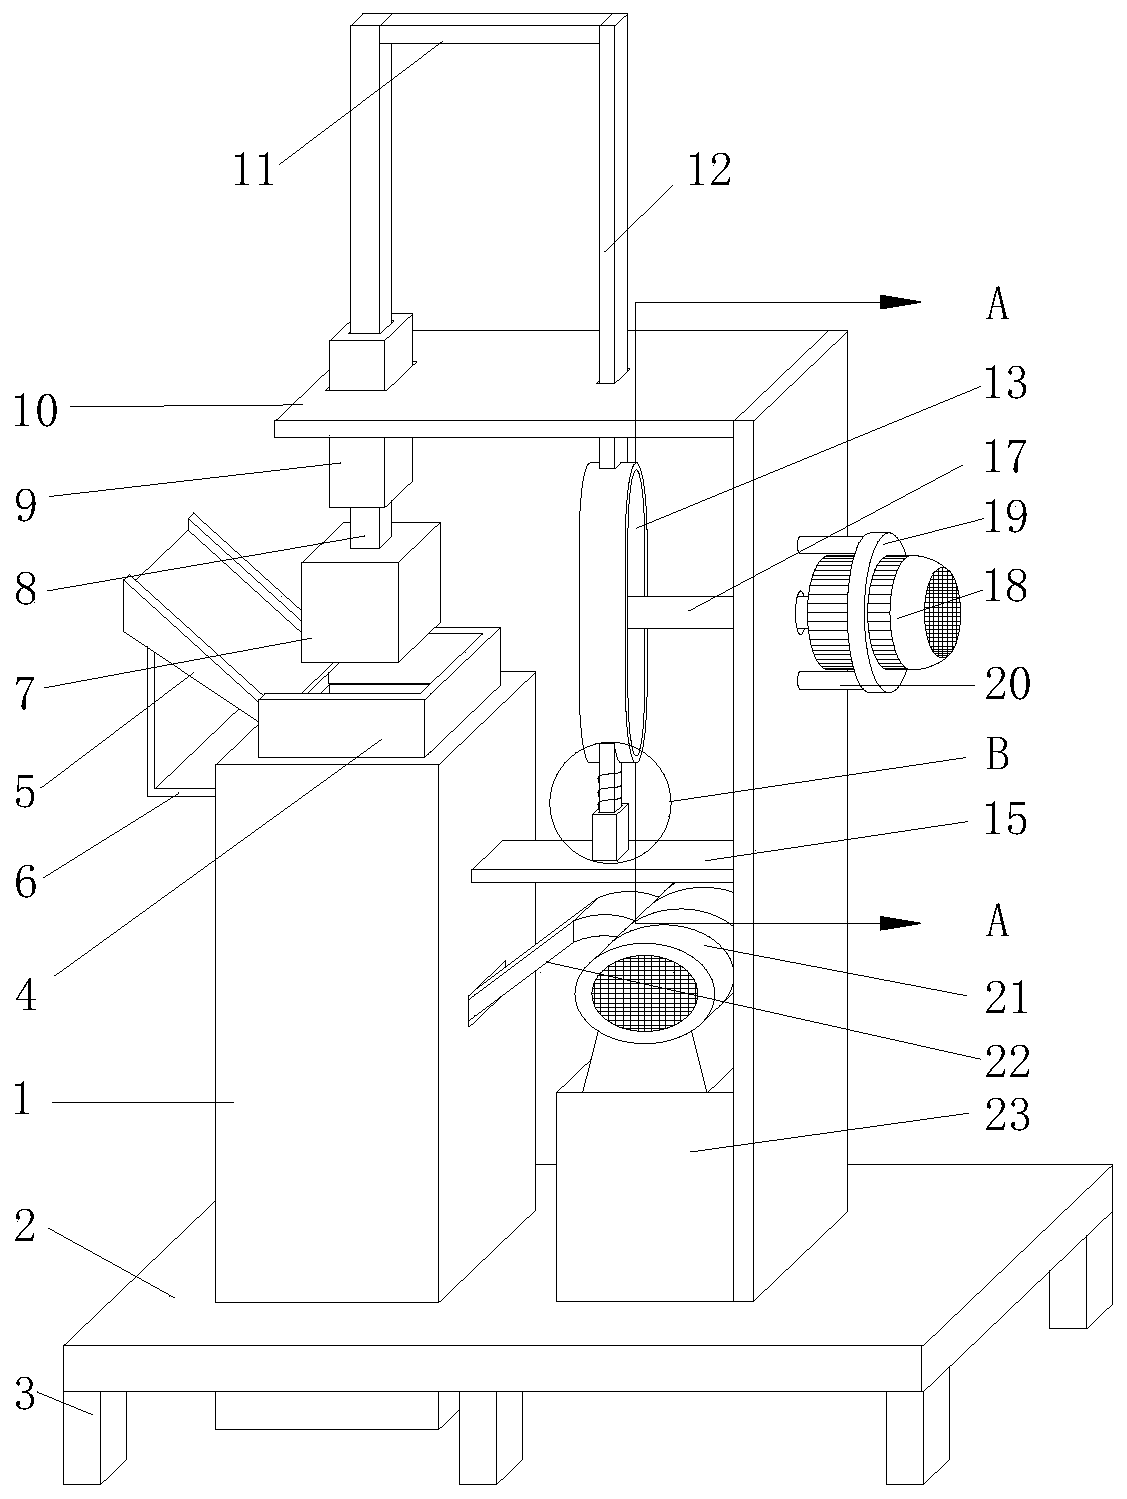 Camellia japonica edible oil processing and supplying device